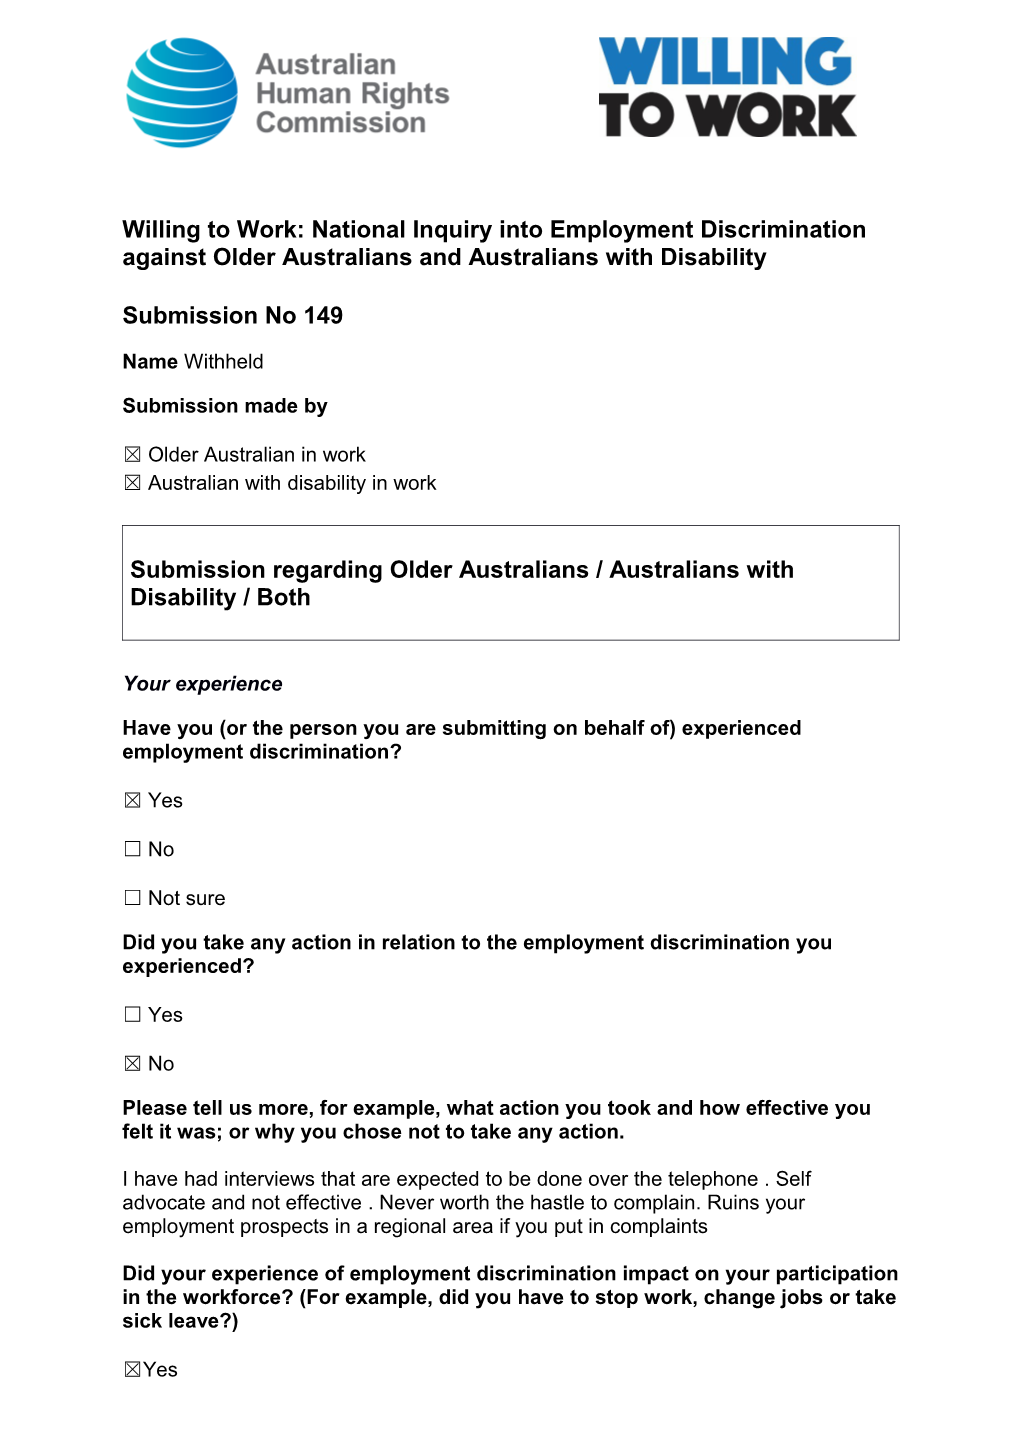 Willing to Work: National Inquiry Into Employment Discrimination Against Older Australians s1